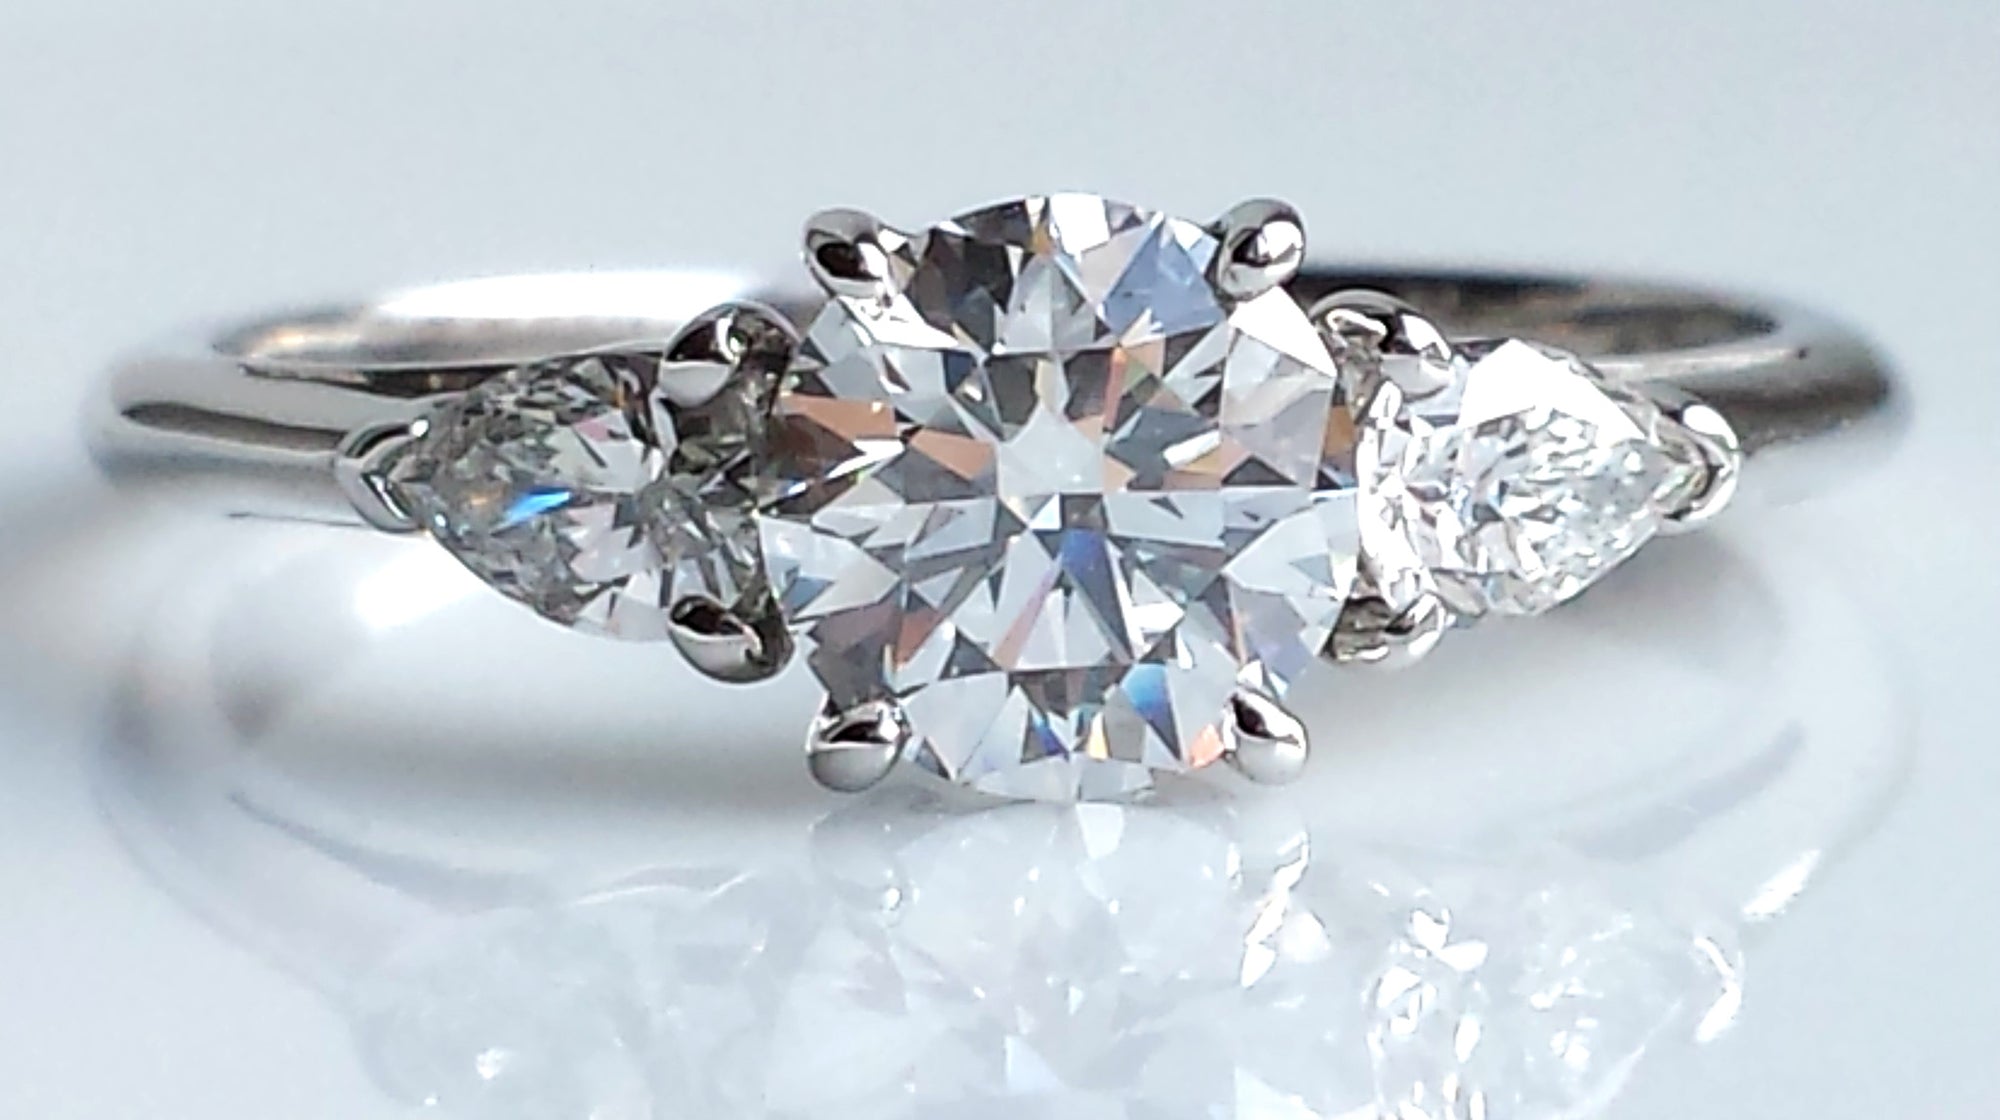 Tiffany & Co. 1.24ct G/VS1 Round Brilliant Cut Diamond Engagement Ring with Pear-shaped Side Stones